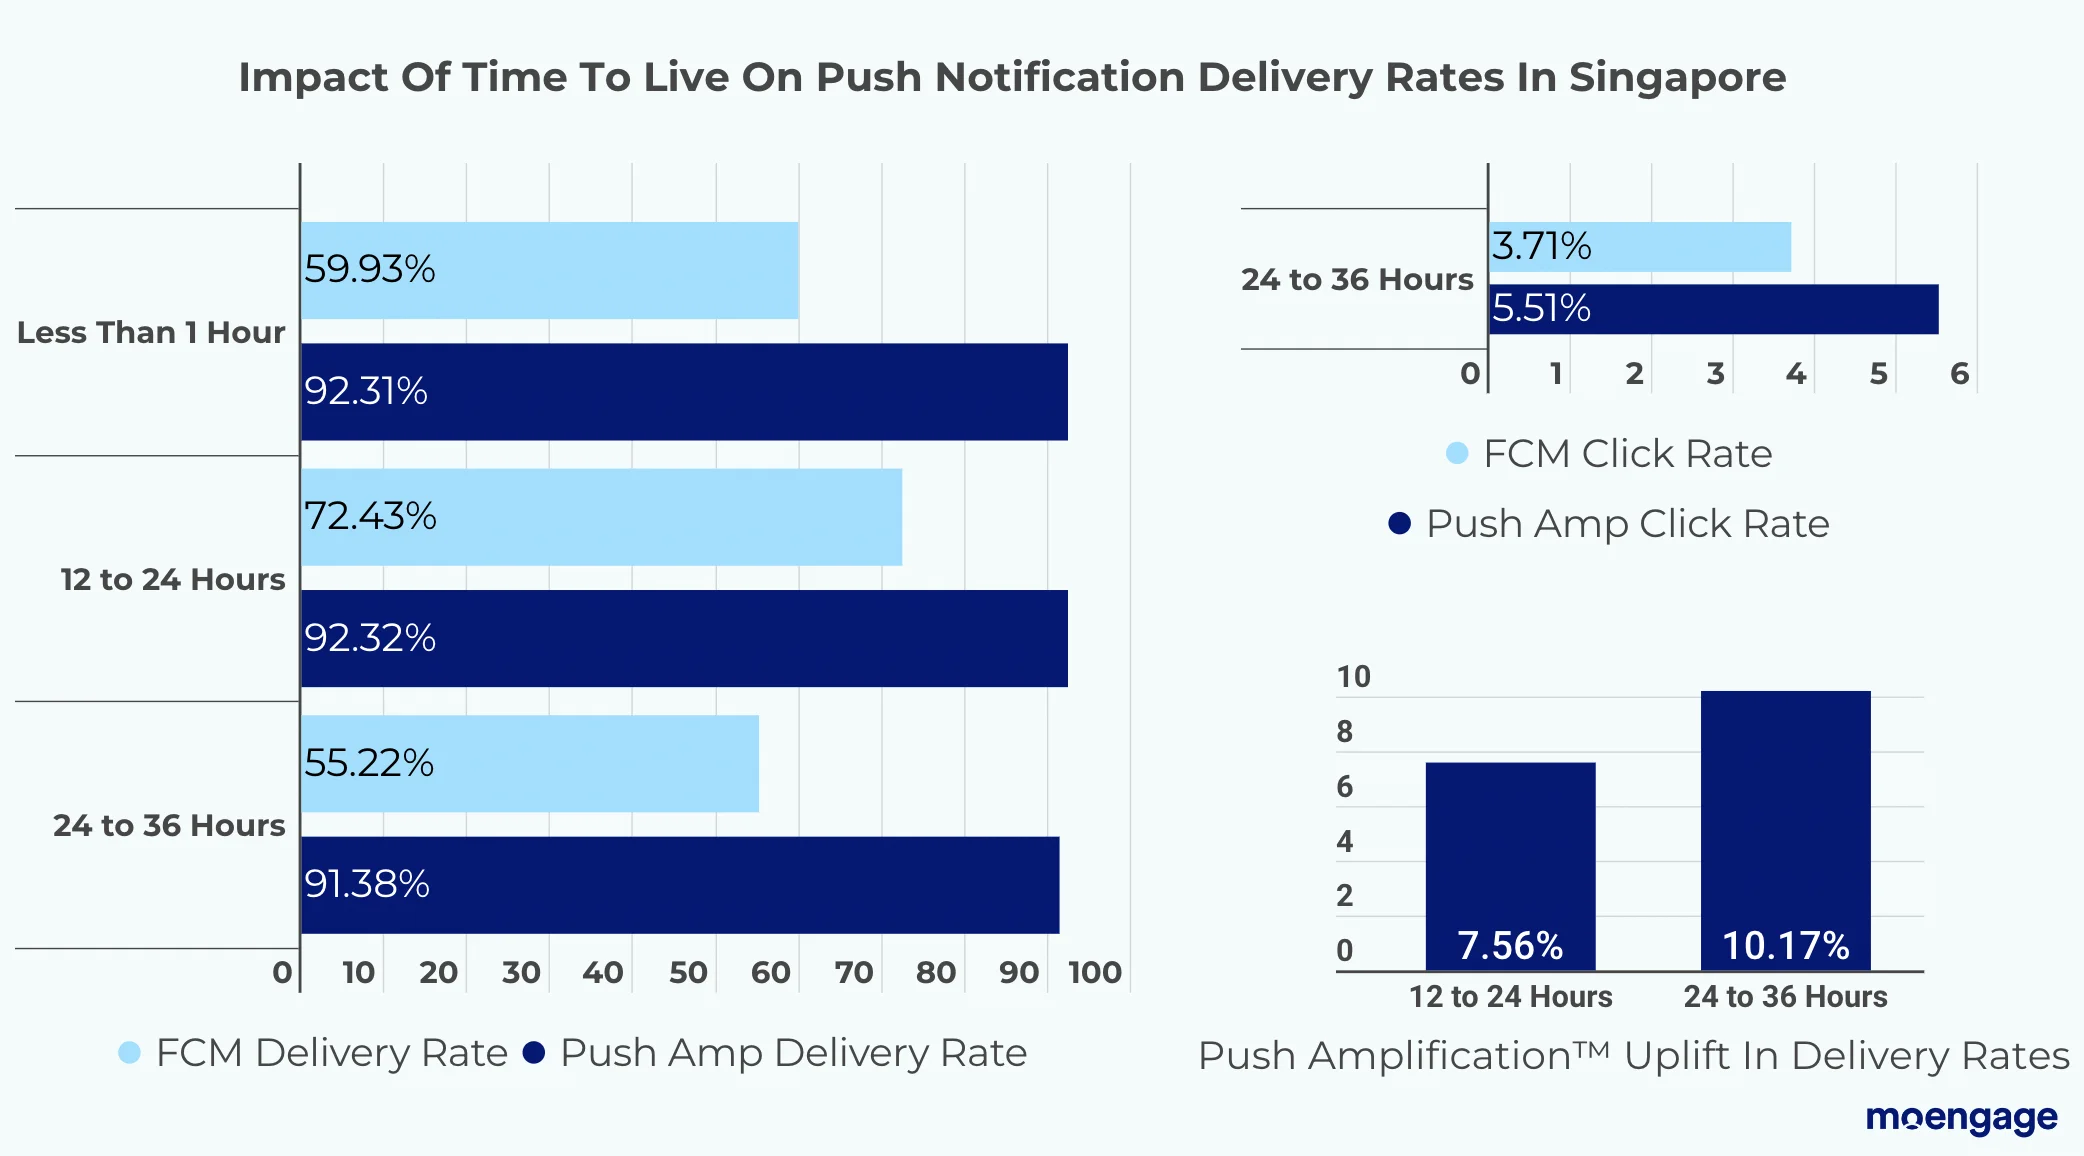 Impact of time to live on push notification delivery rate in Singapore